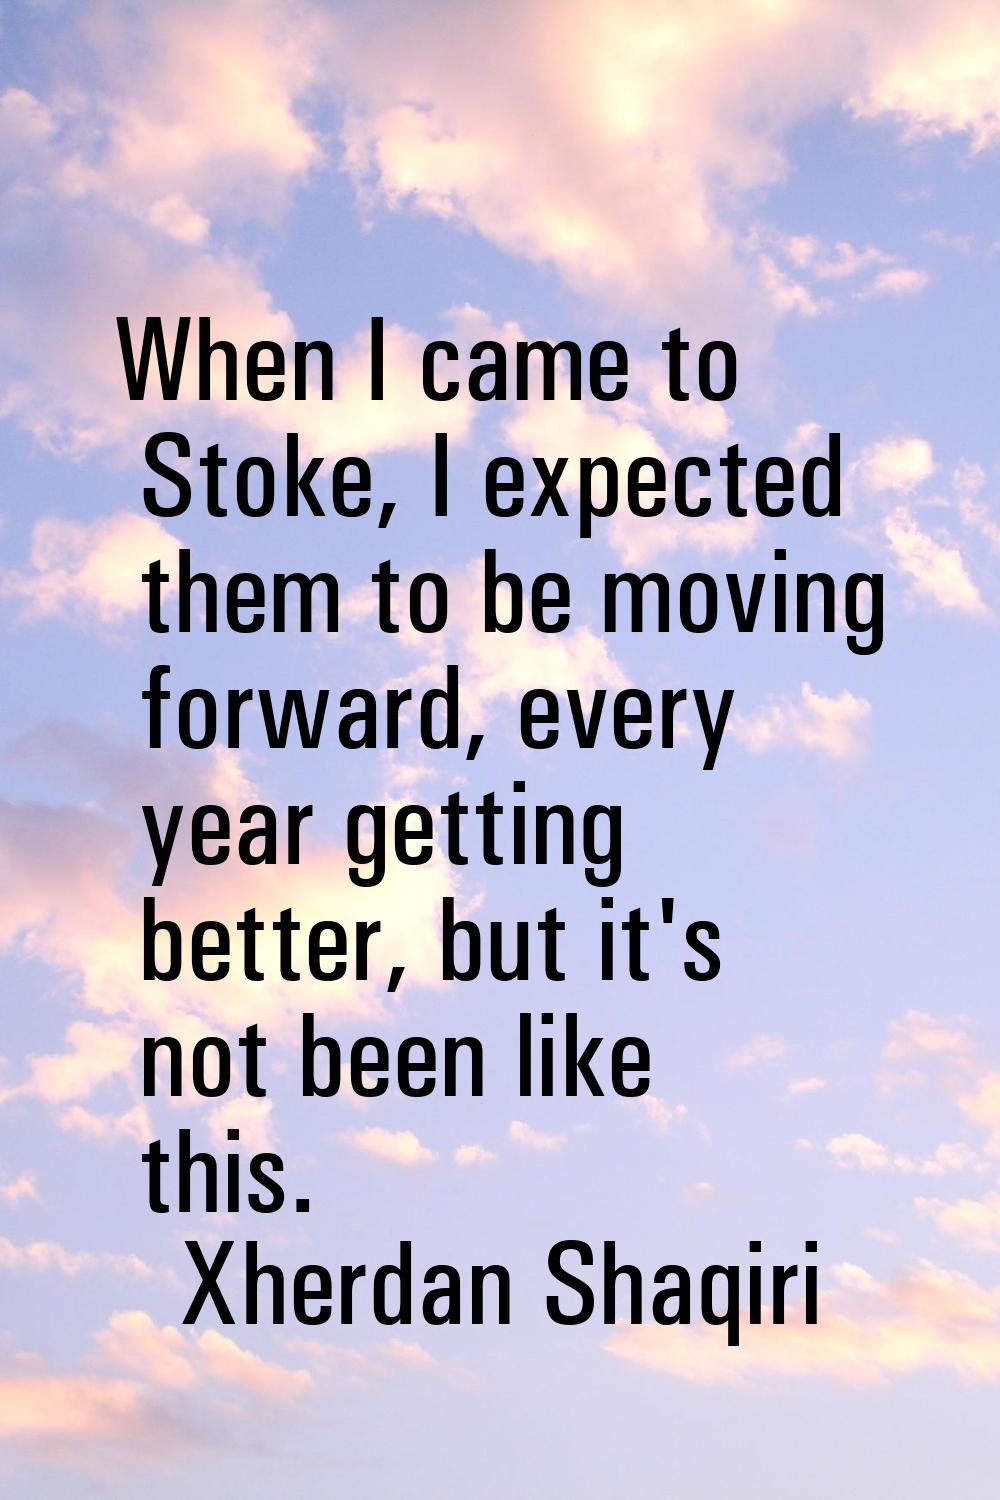 When I came to Stoke, I expected them to be moving forward, every year getting better, but it's not